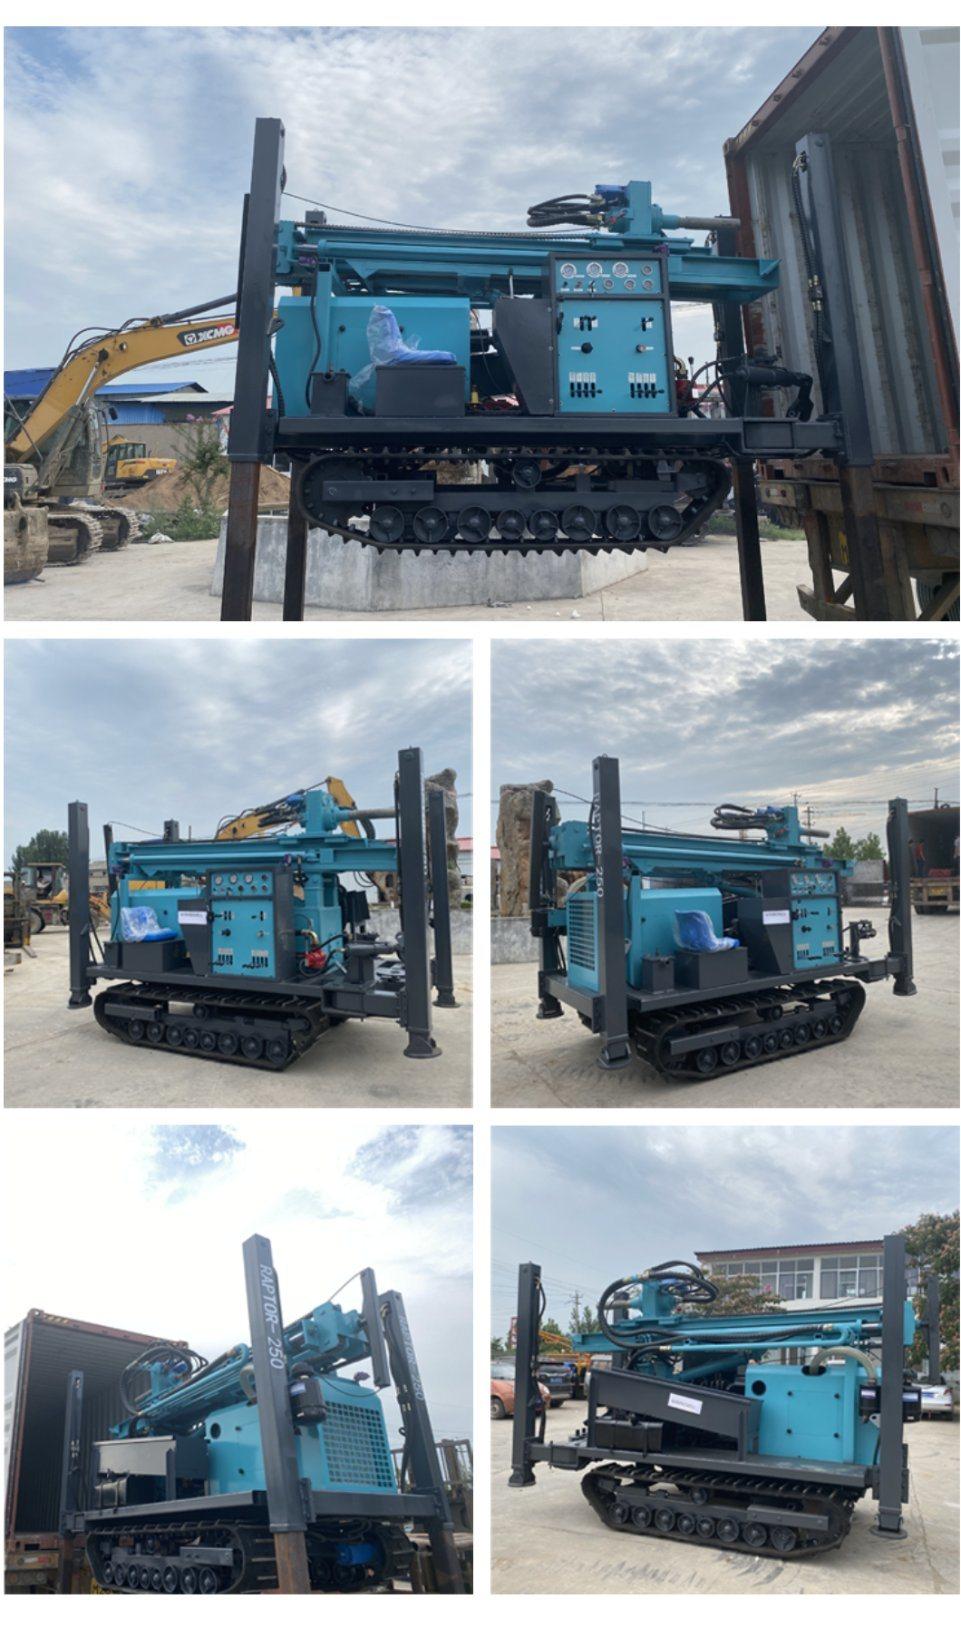 Dminingwell MW280 Water Well Drilling Rig Geotechnical Exploration 300m Deep Borehole Water Well Drilling Rig Machine